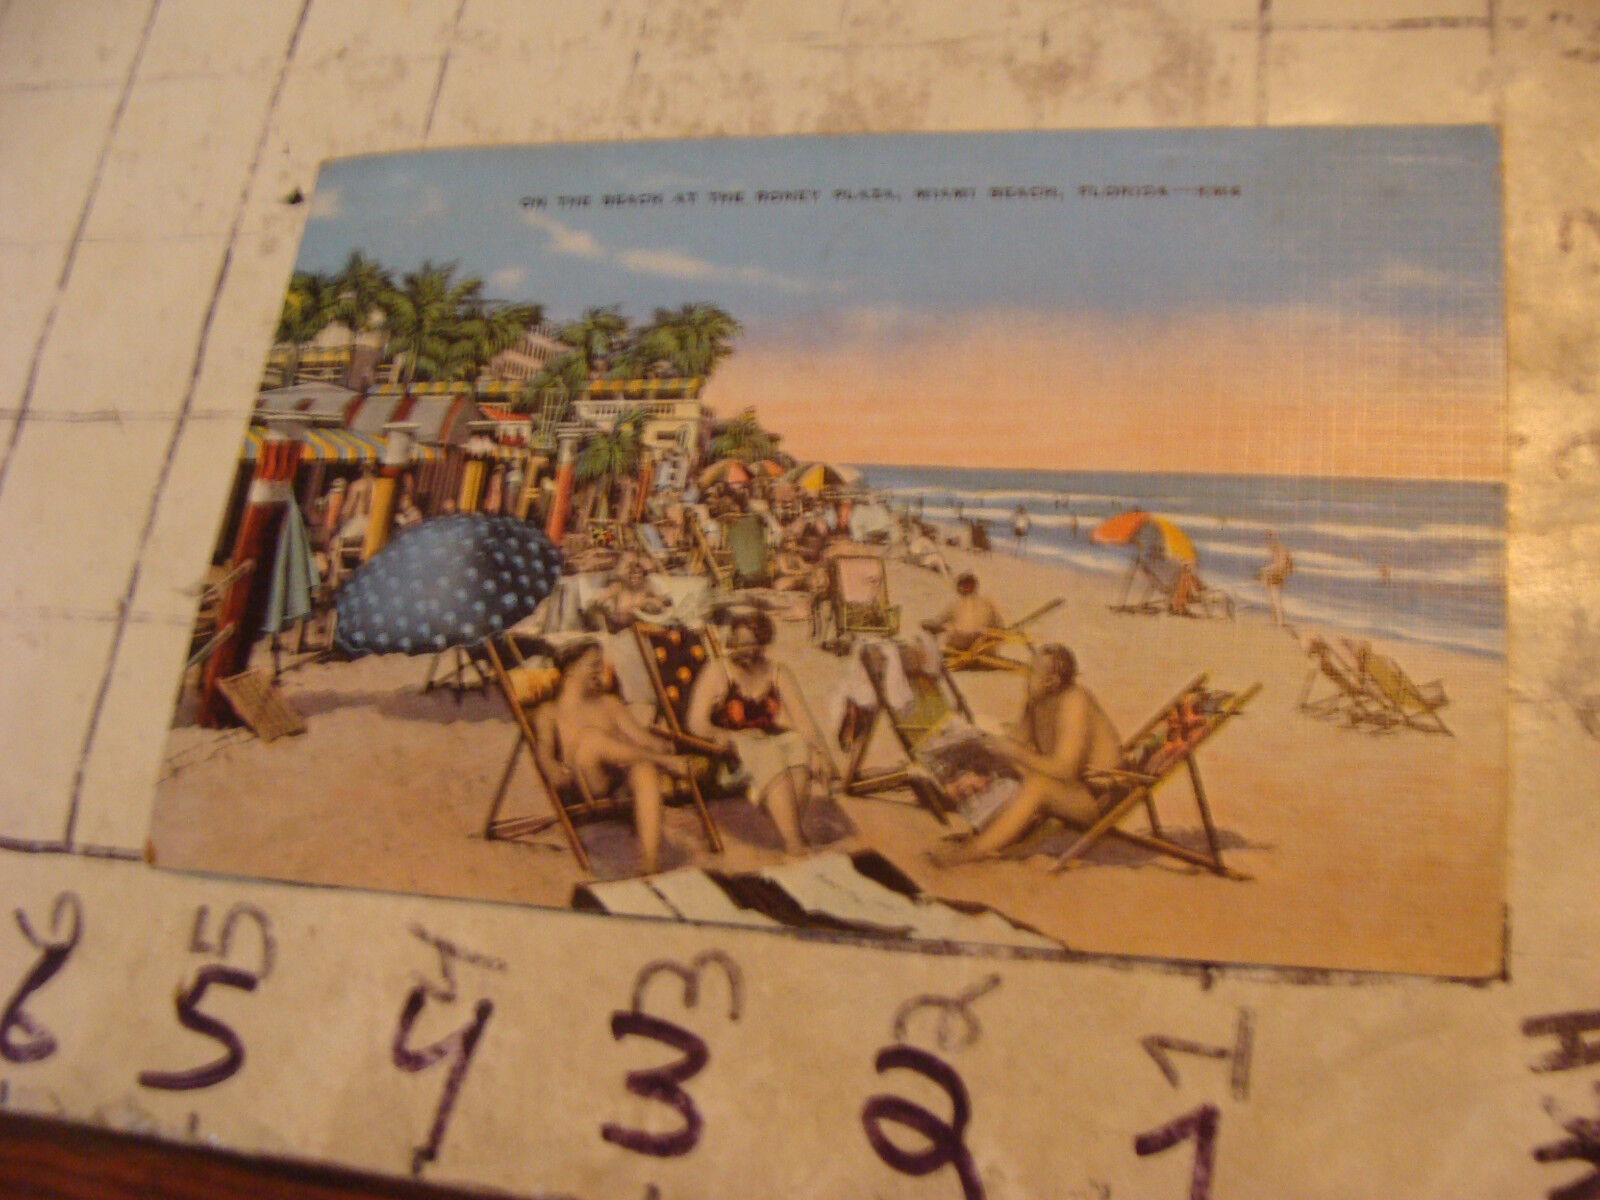 Orig Vint post card 1936 ON THE BEACH AT THE RONEY PLAZA, MIAMI BEACH, FL